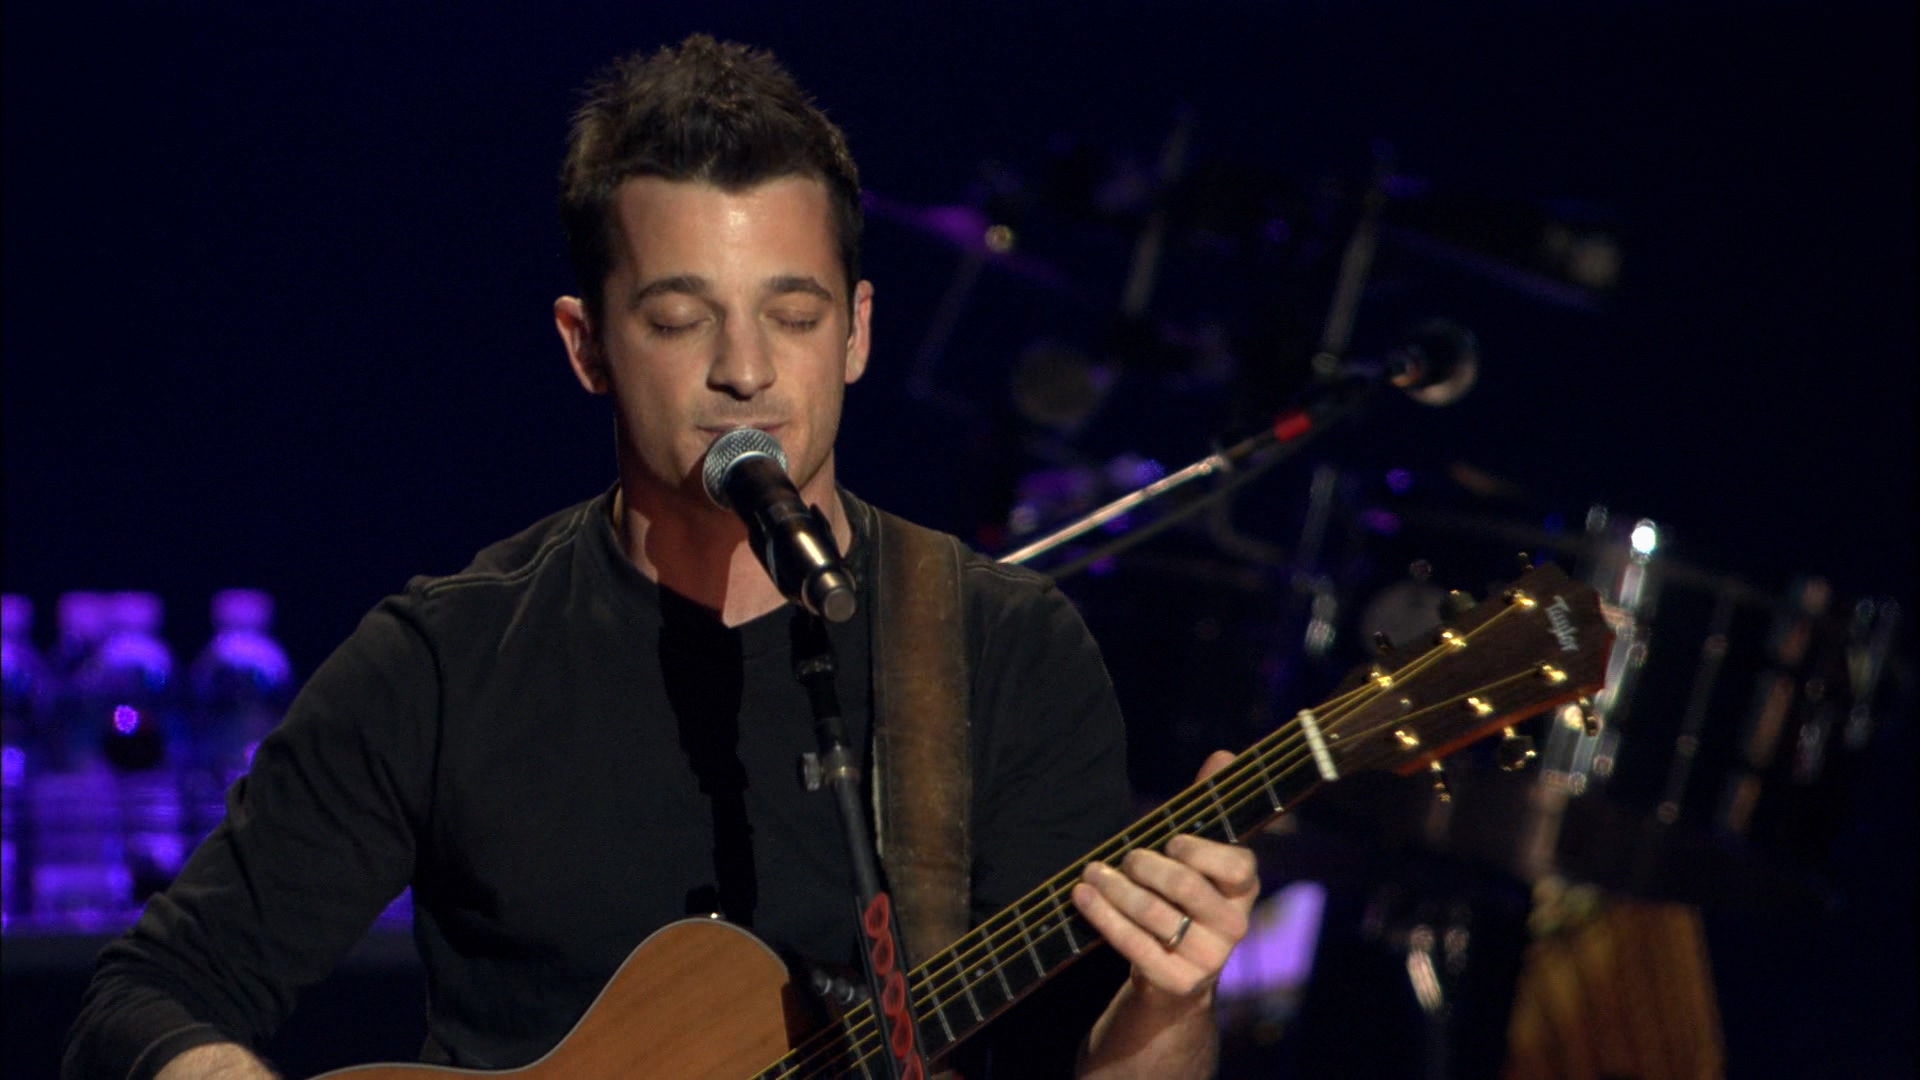 O.A.R. (Of A Revoiution) - Live From Madison Square Garden_20200127_201405.018.jpg